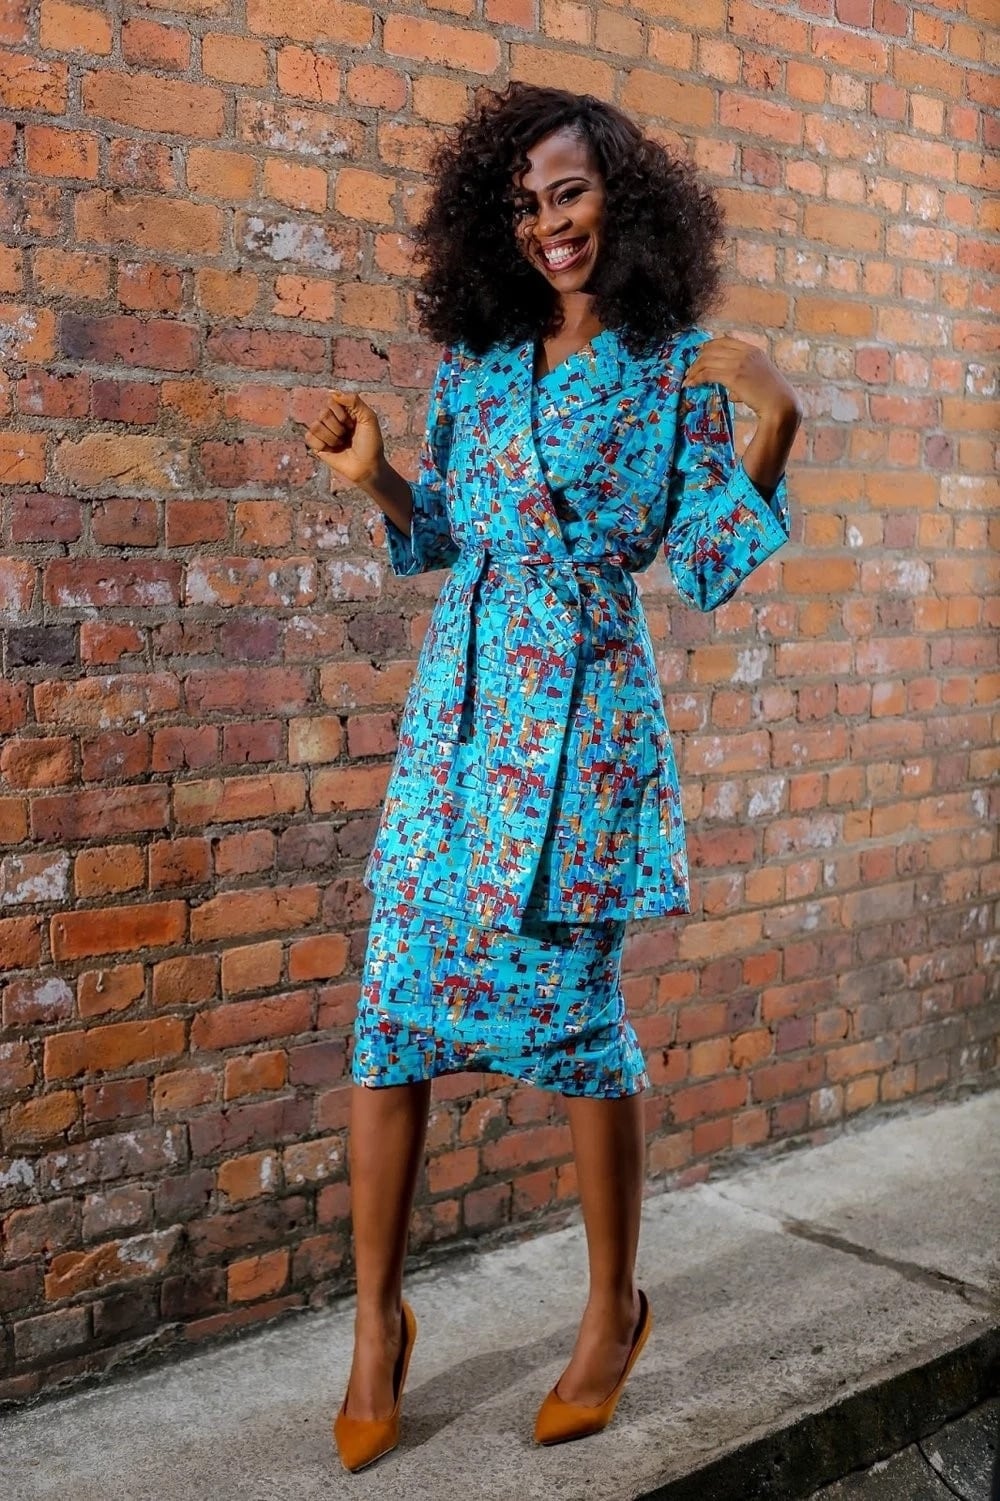 african print styles
african wear for ladies
ghanaian african wear styles
modern african dress styles
straight dresses